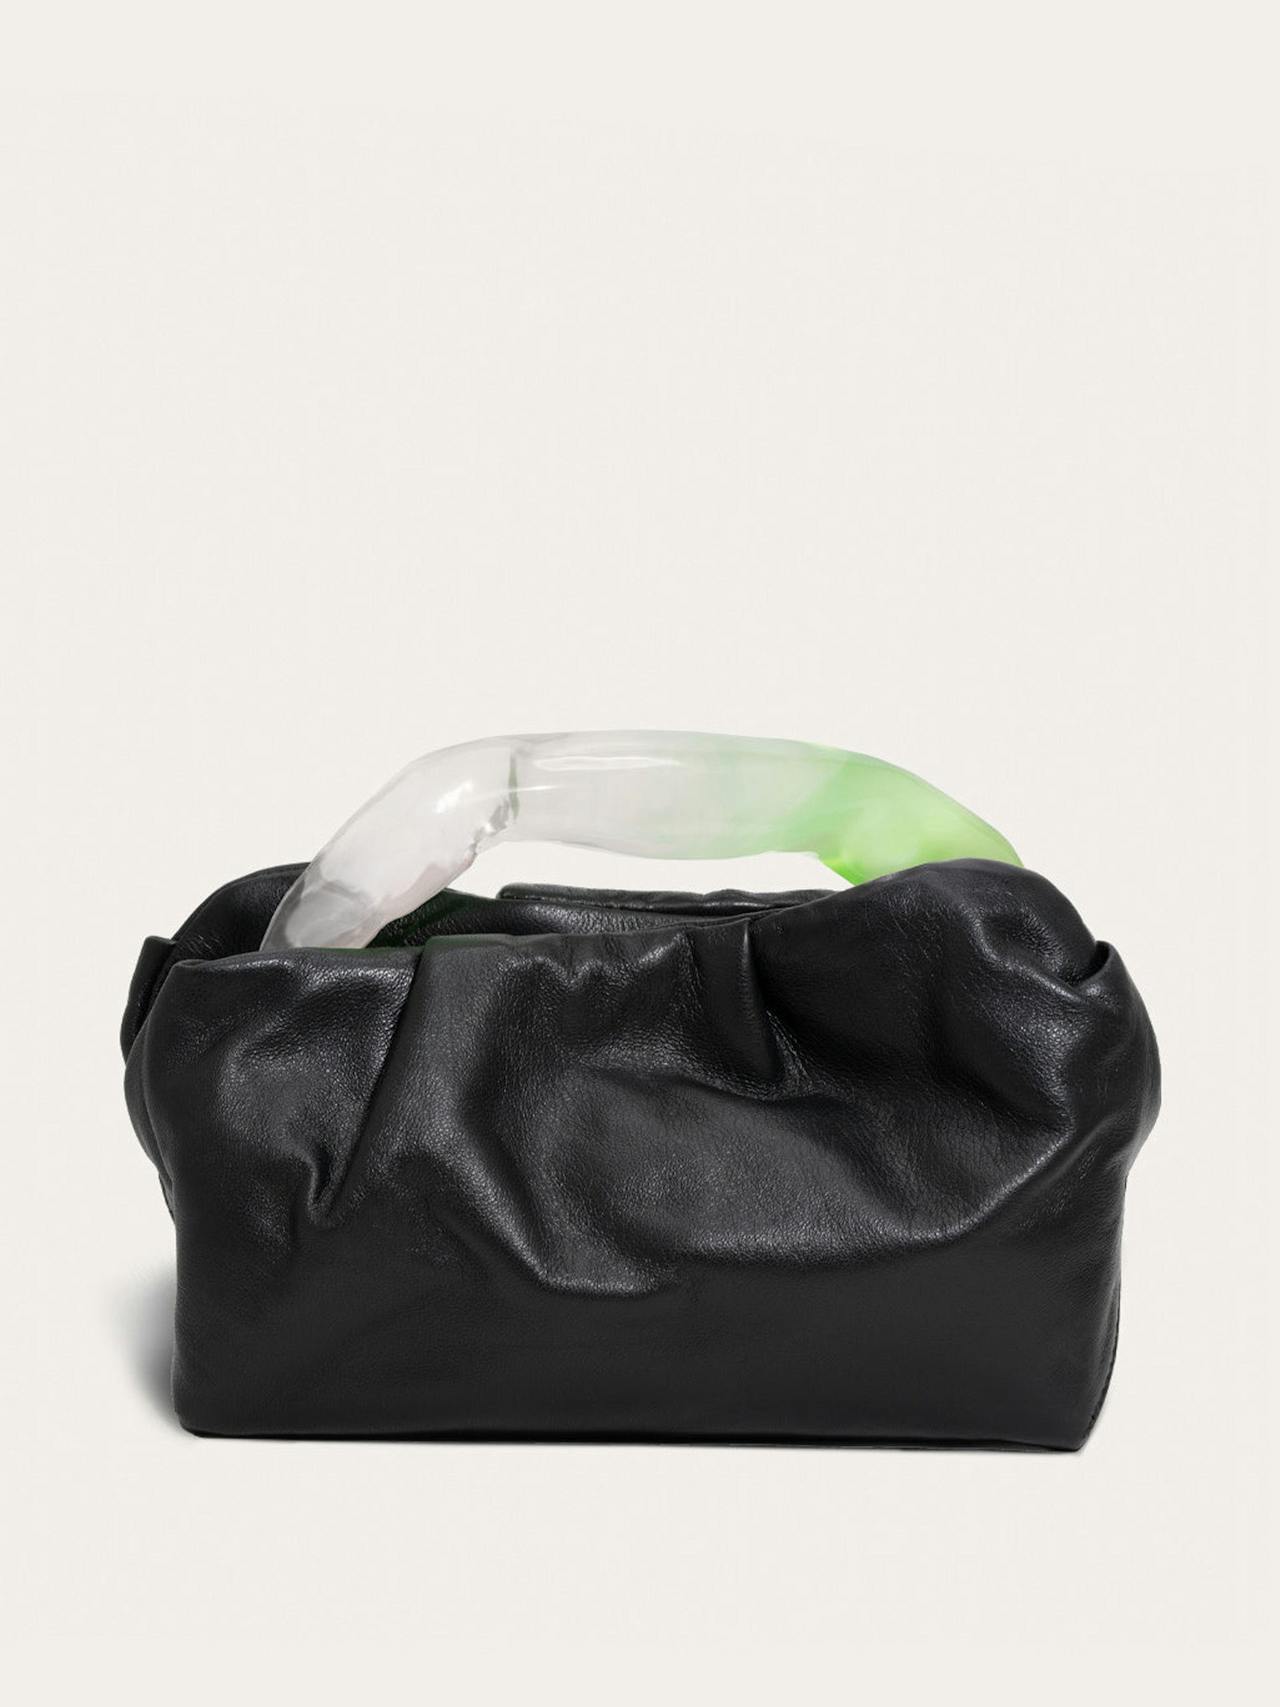 Lime Resin and black leather clutch bag